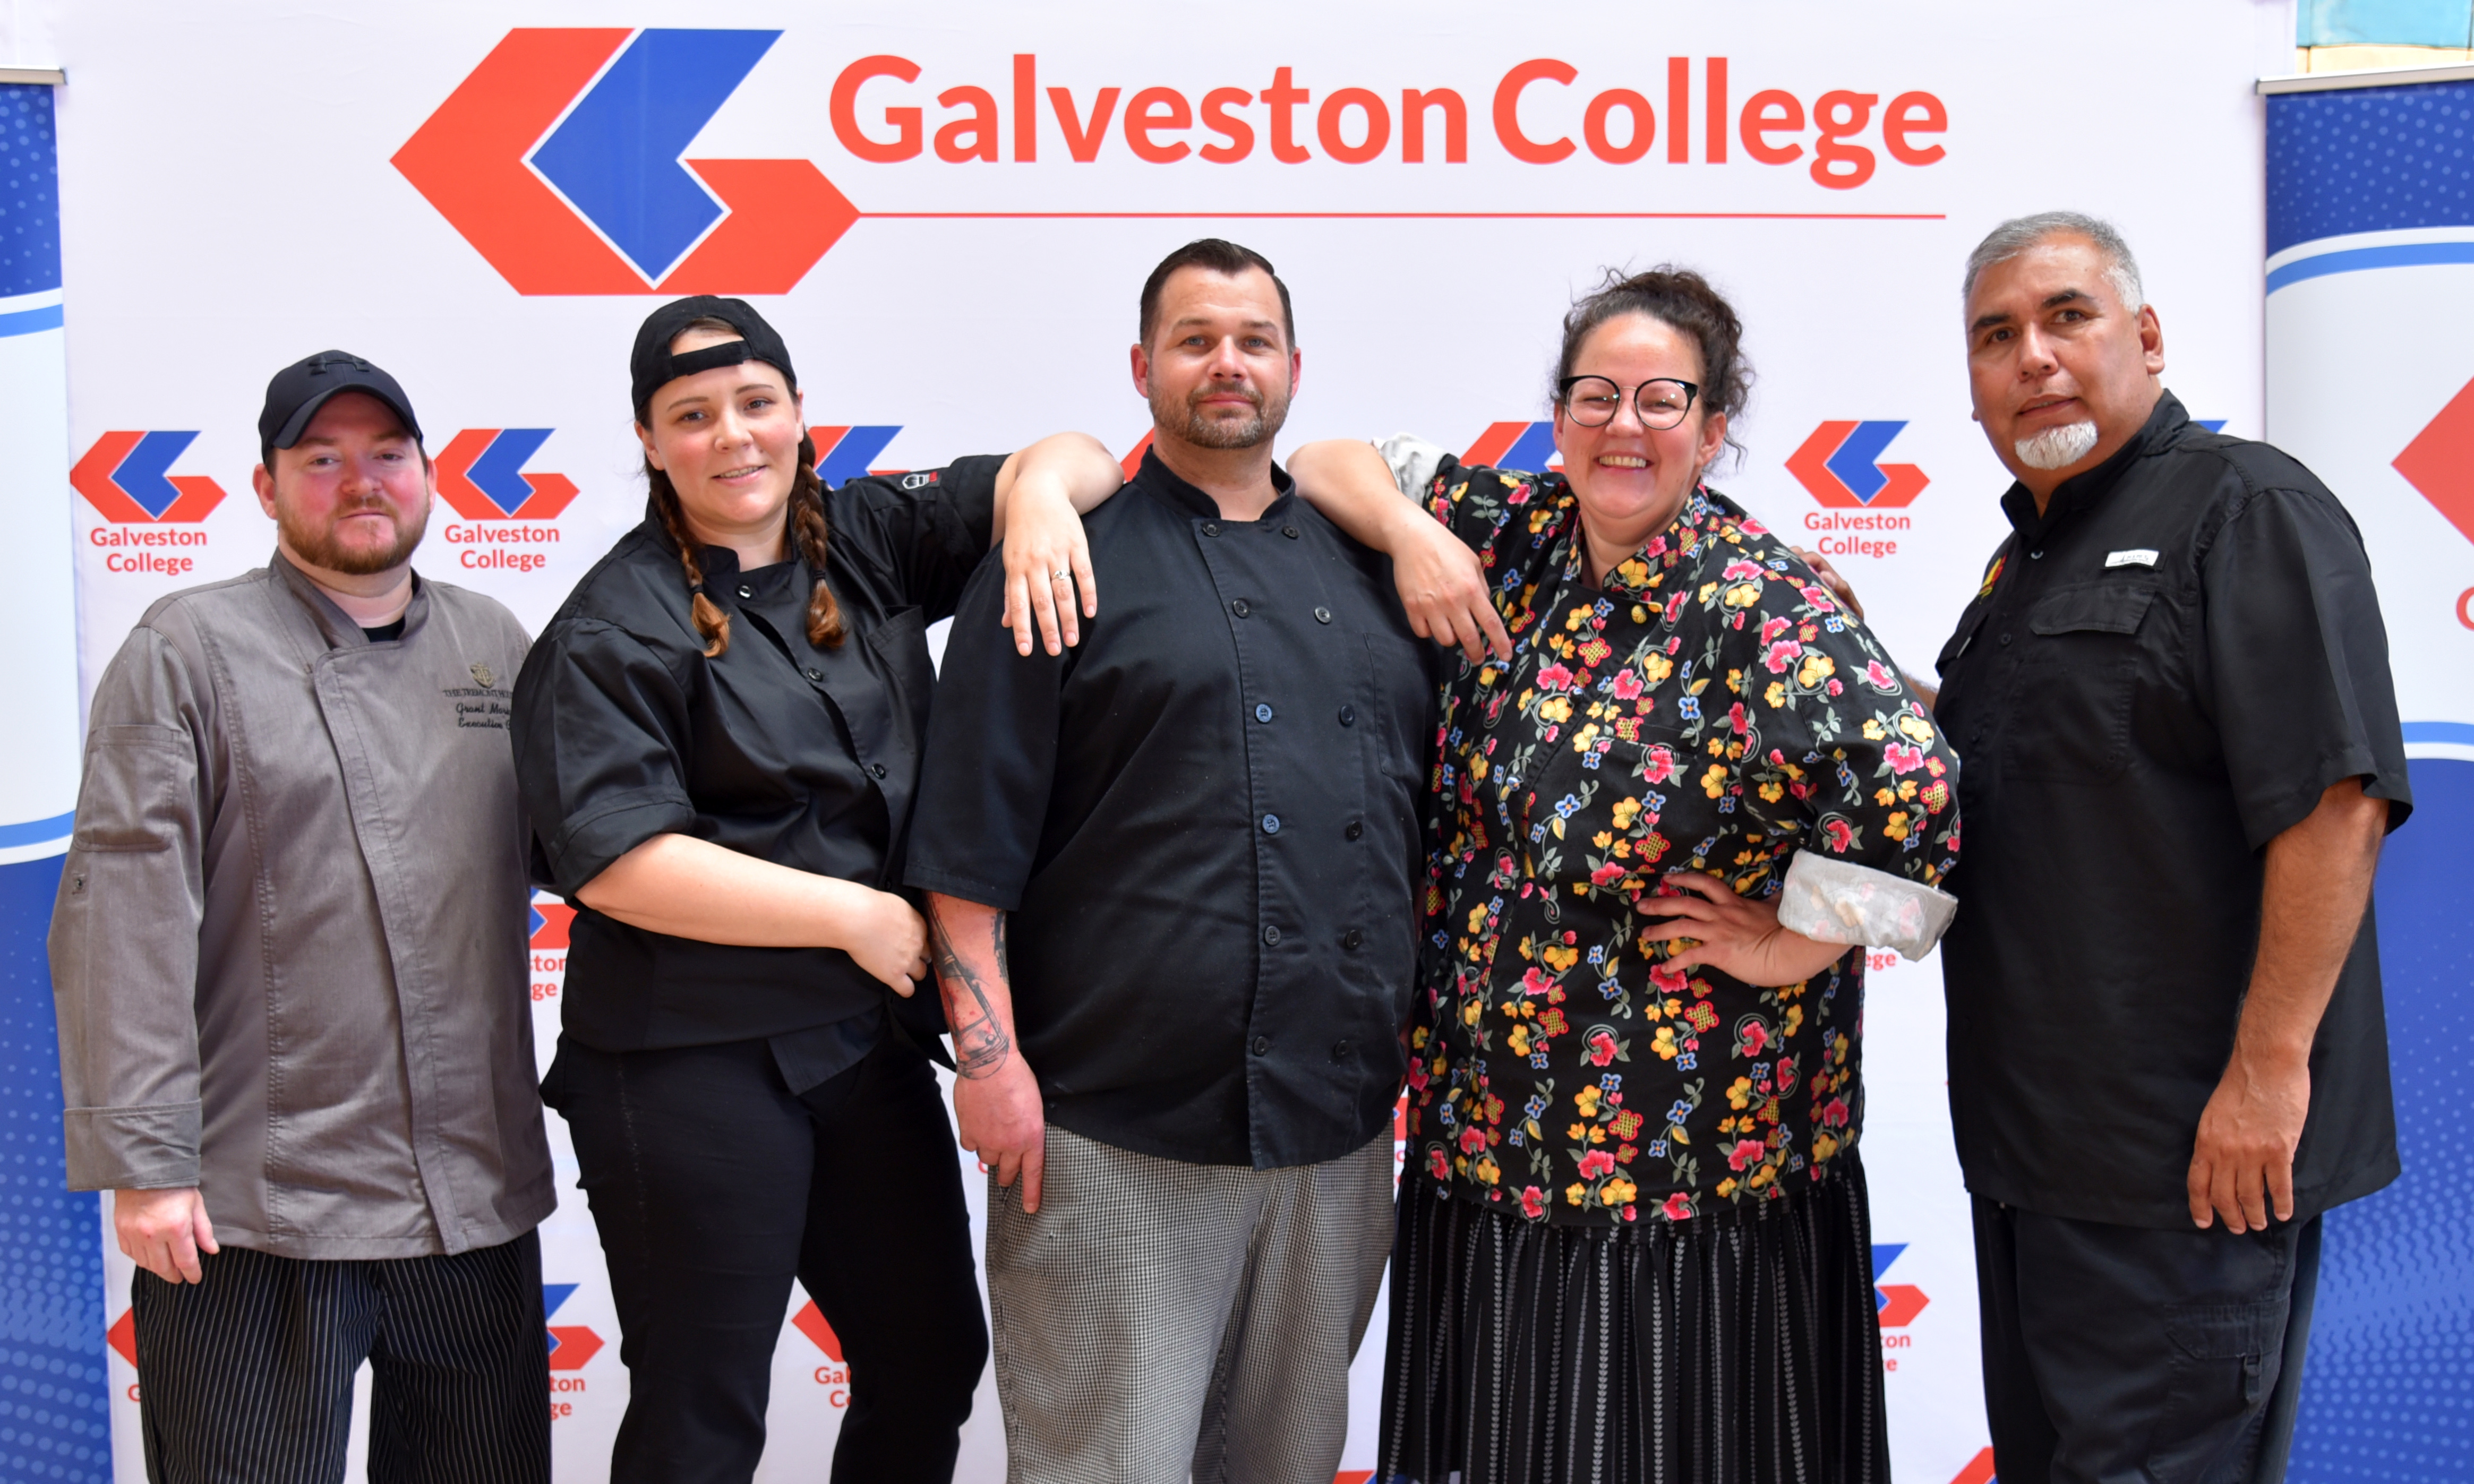 Chefs come together for Galveston College’s Five Fabulous Chefs event